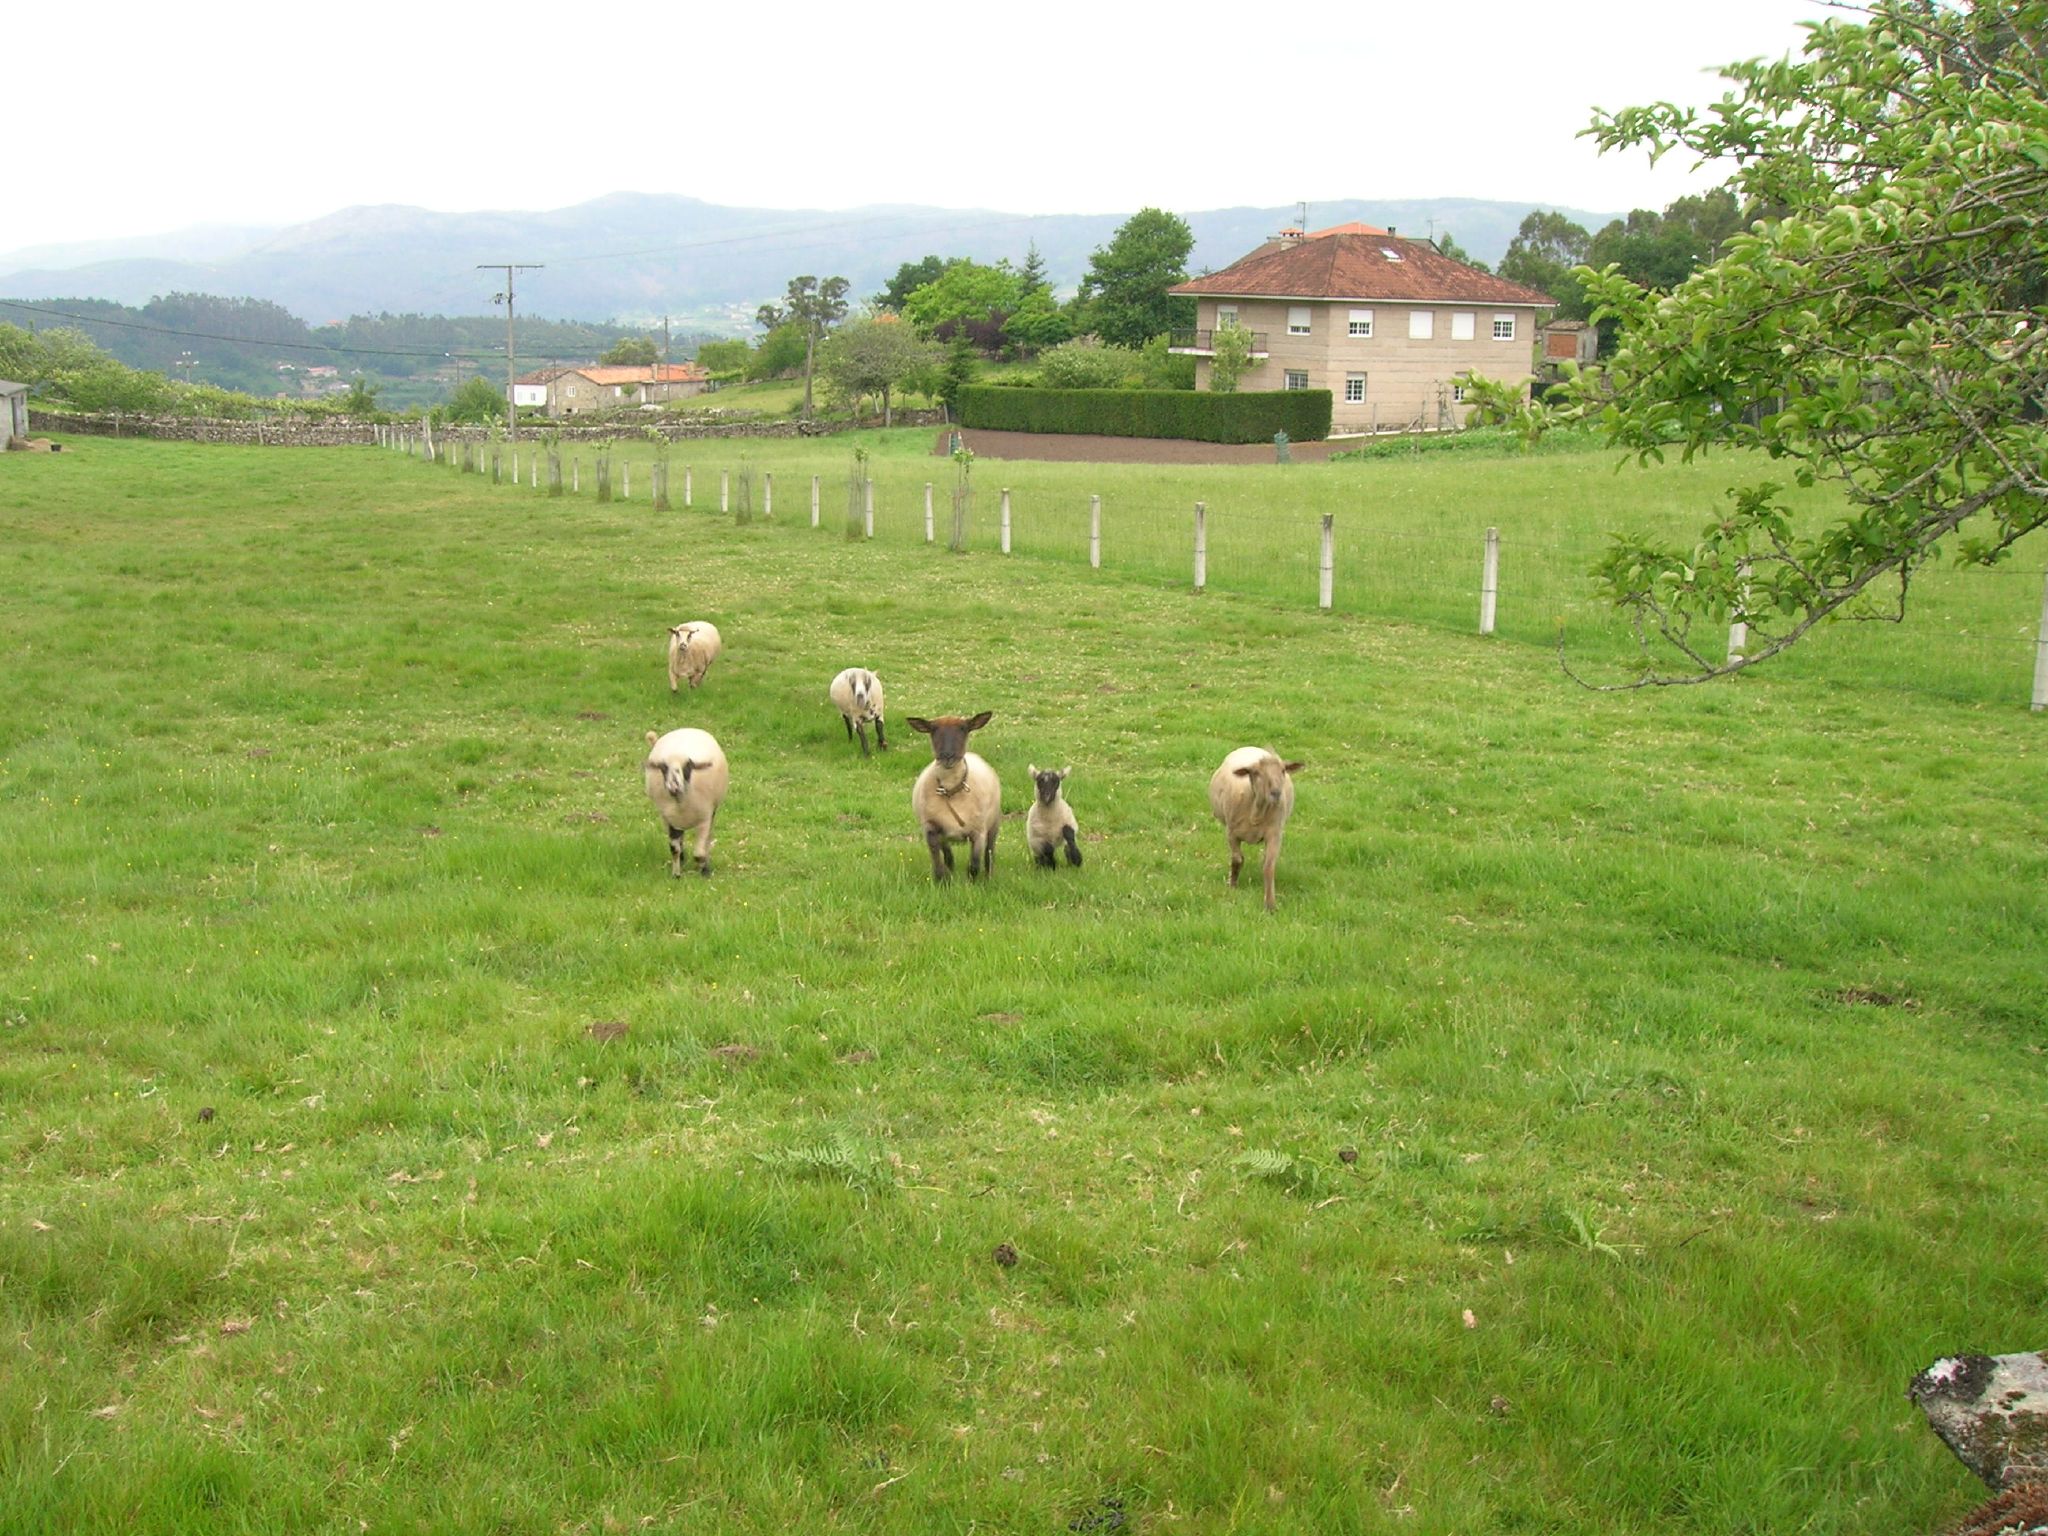 sheep are grazing in a green pasture with houses in the distance